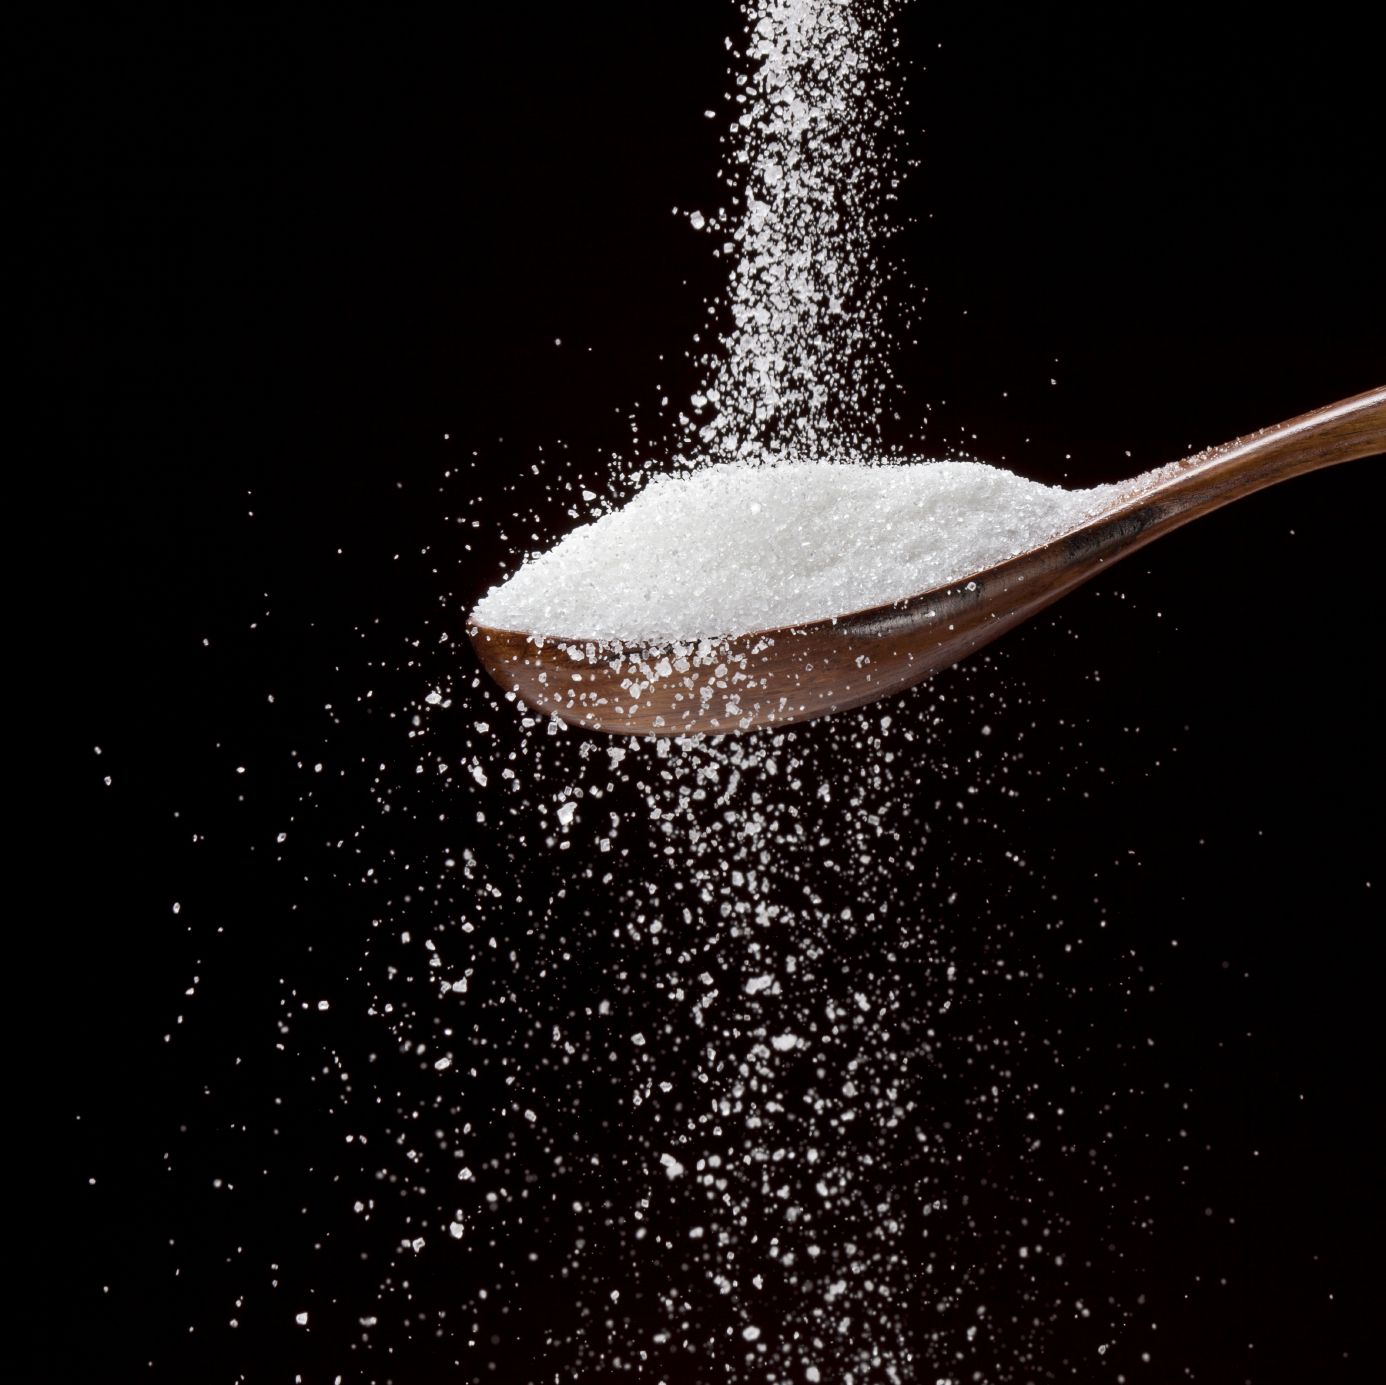 How the Sugar Industry Shifted Blame to Fat